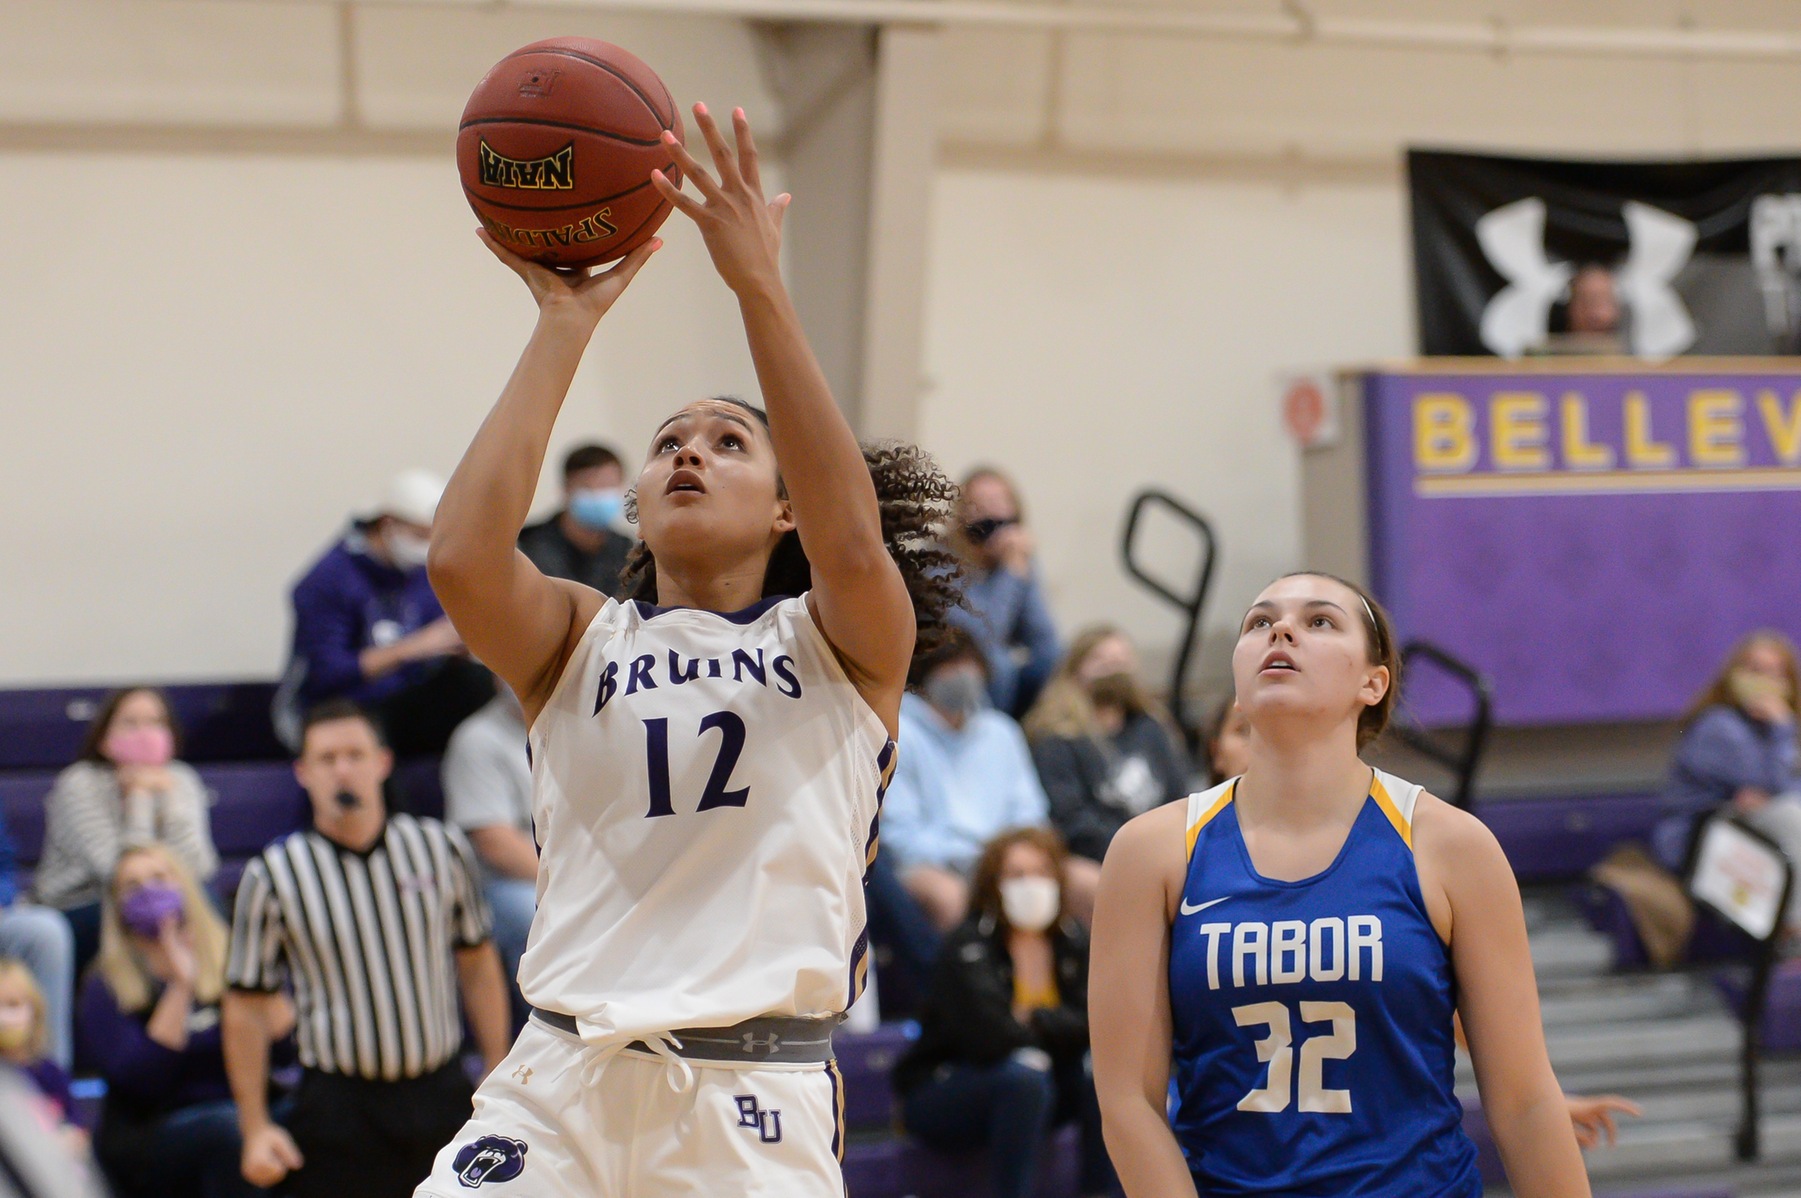 Elexis Martinez scored 18 points in the fourth quarter and led the Bruins with 22 total points.